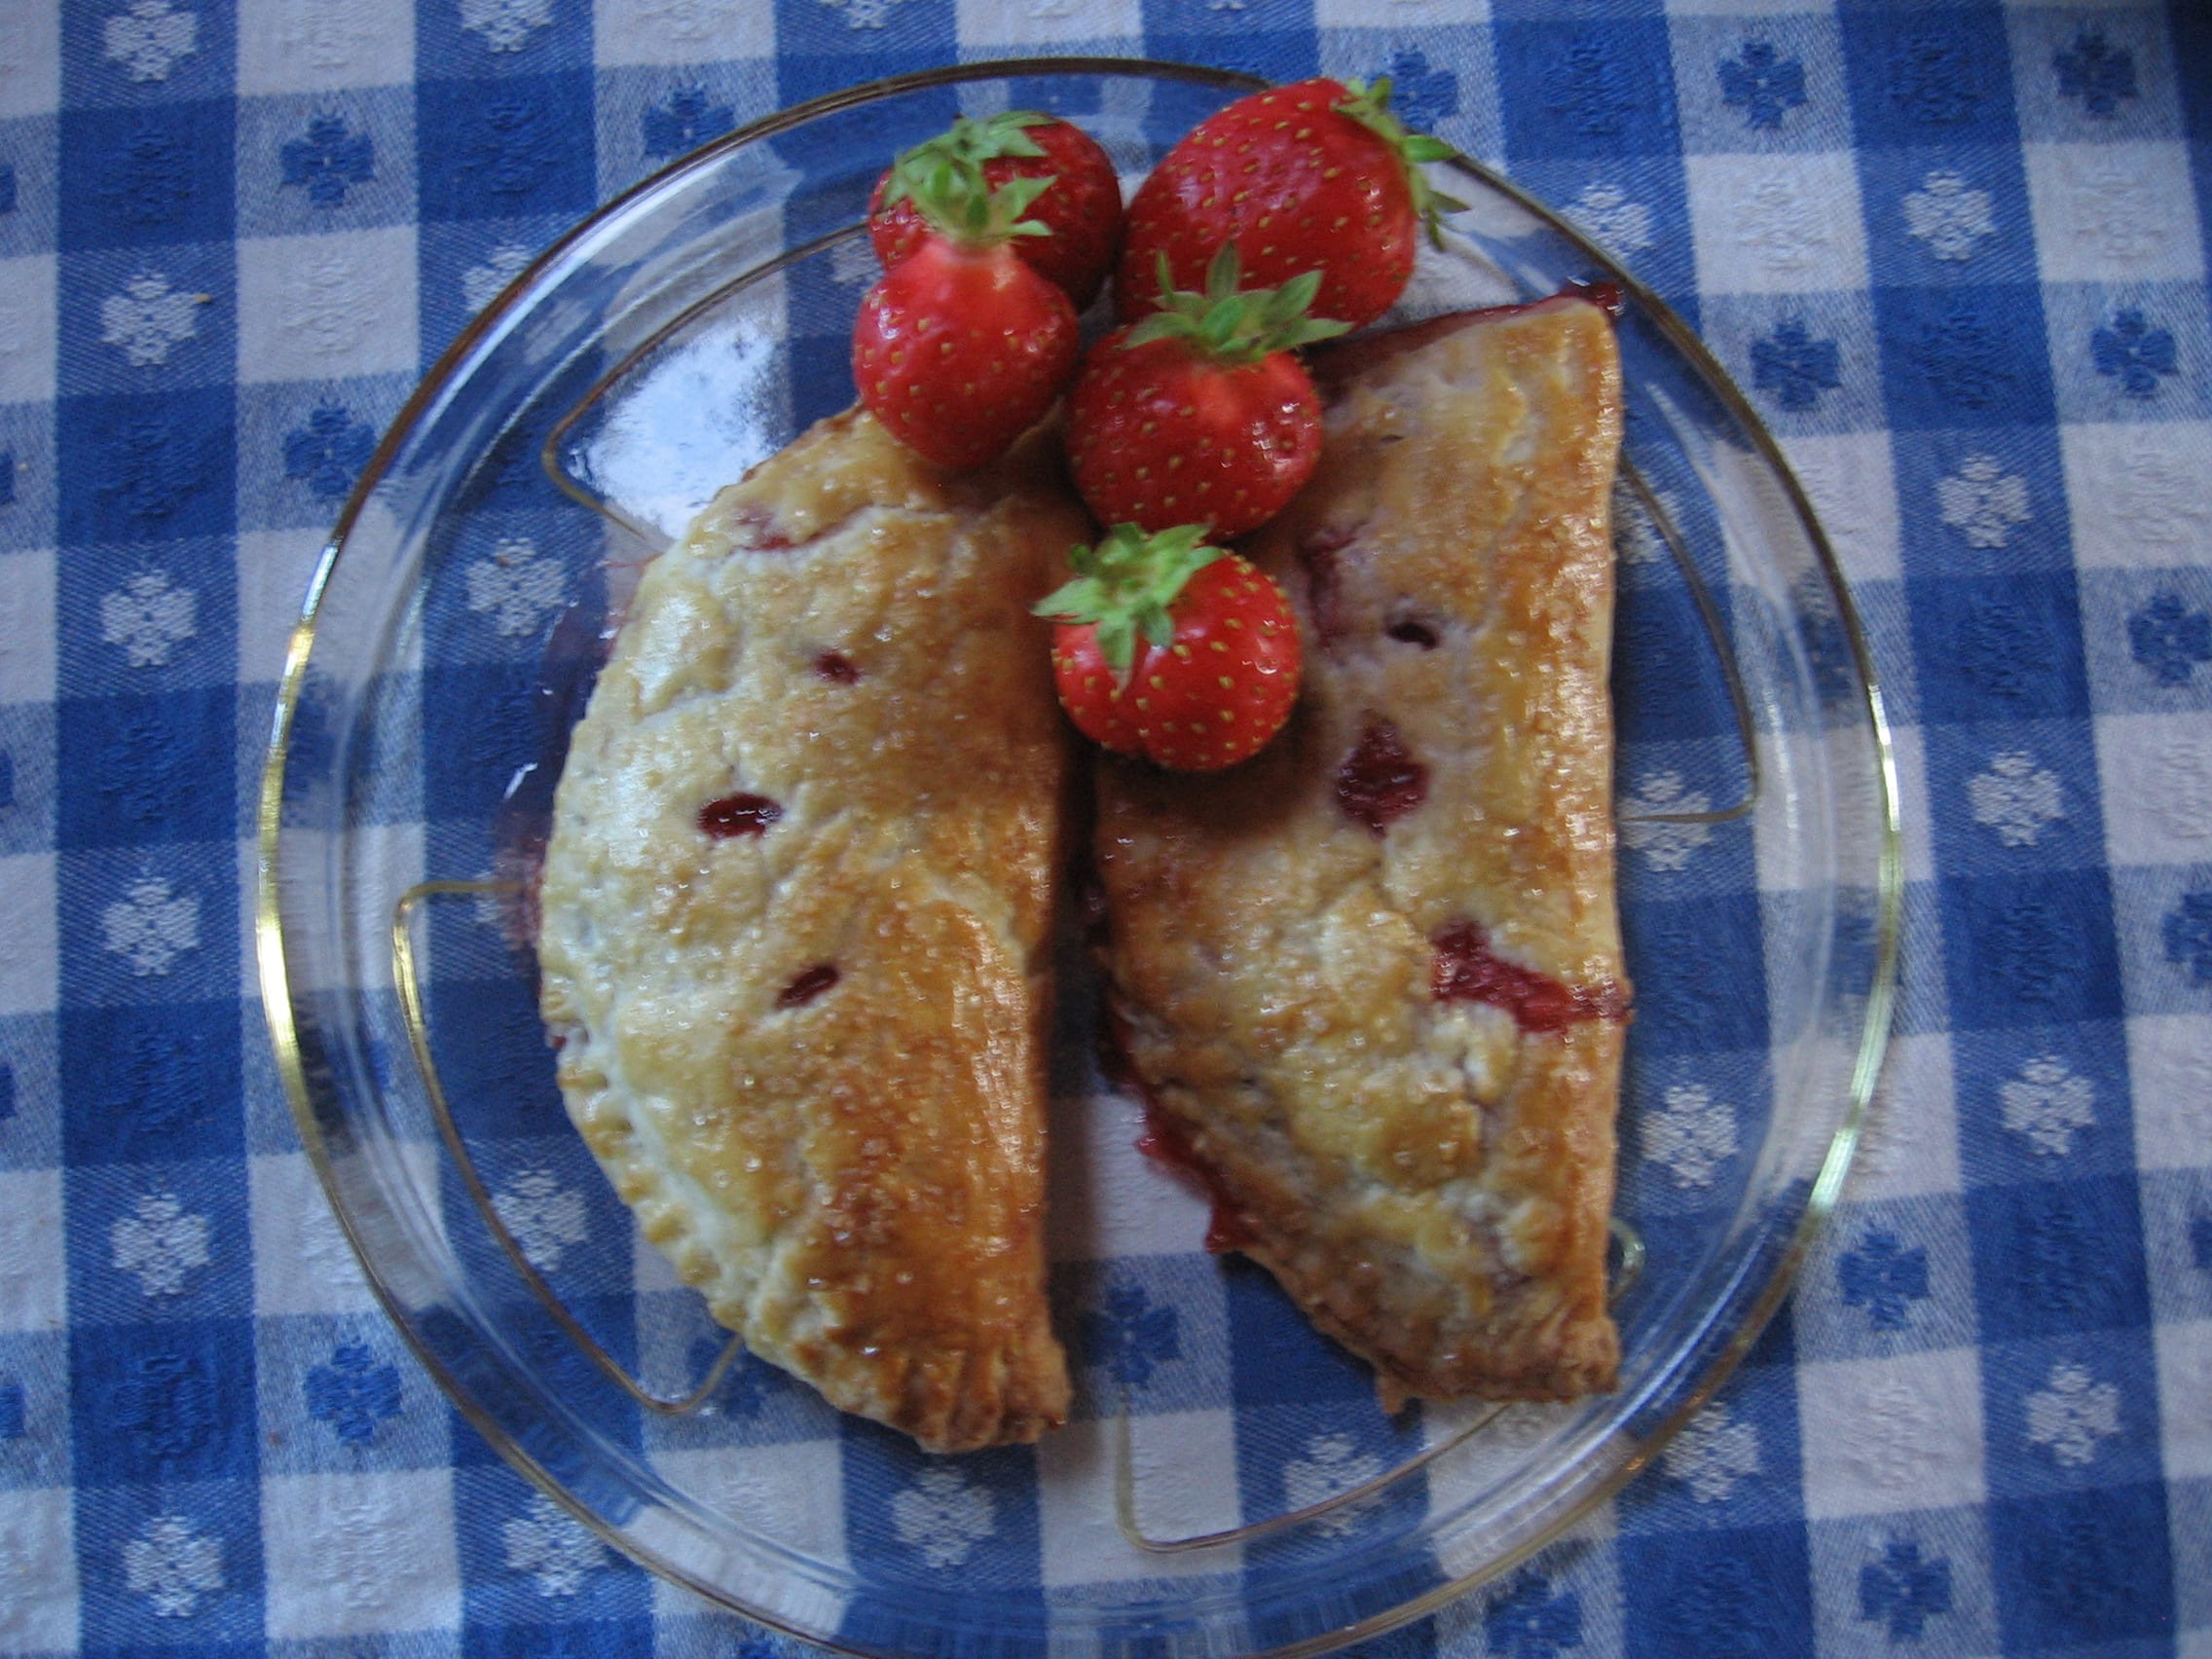 Strawberry hand pie made with Orcas Island strawberries